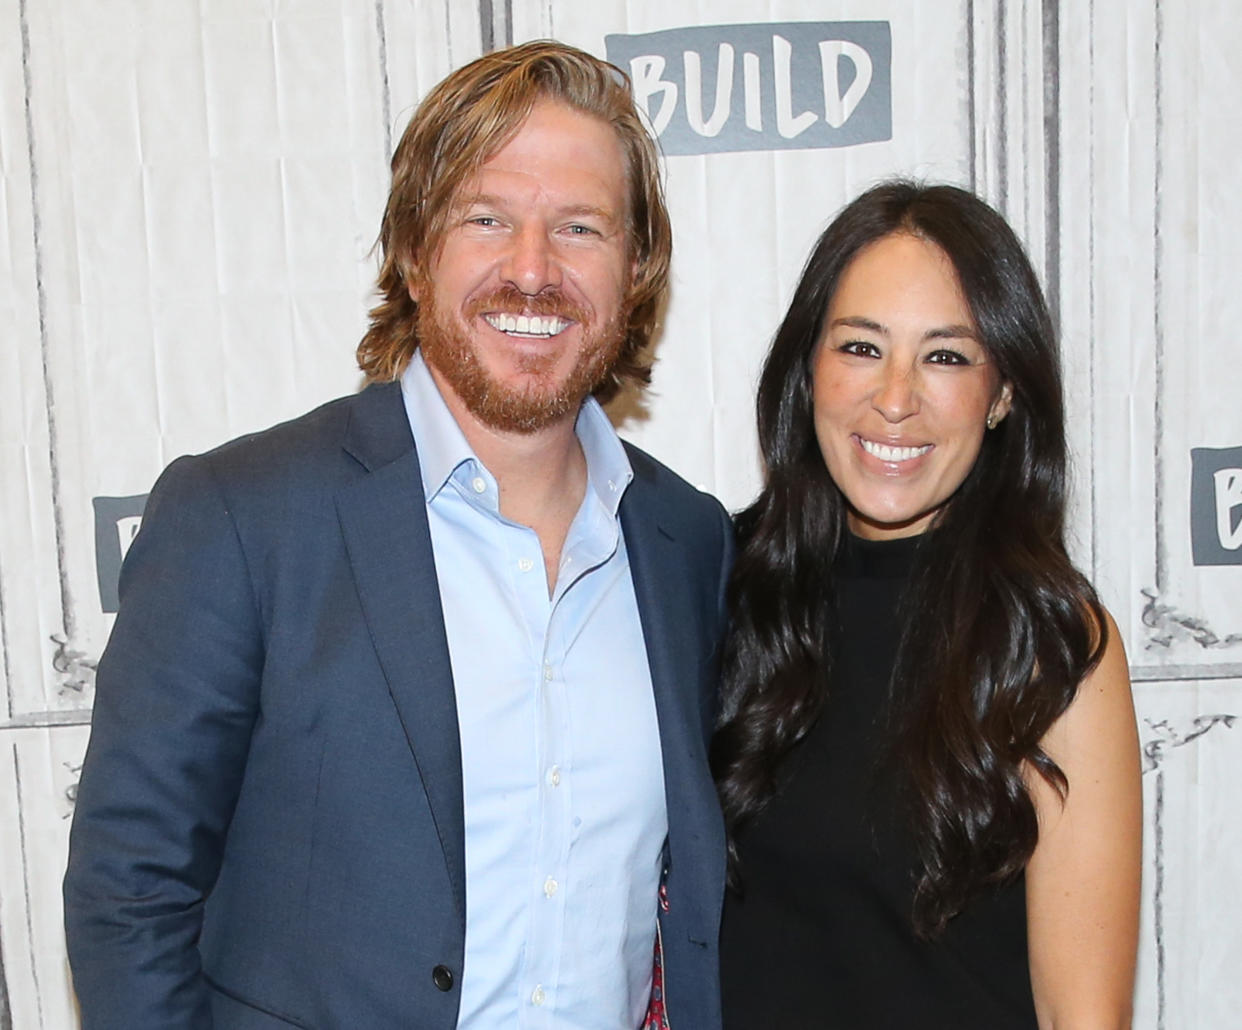 Joanna and Chip Gaines preview new shows for Magnolia Network.